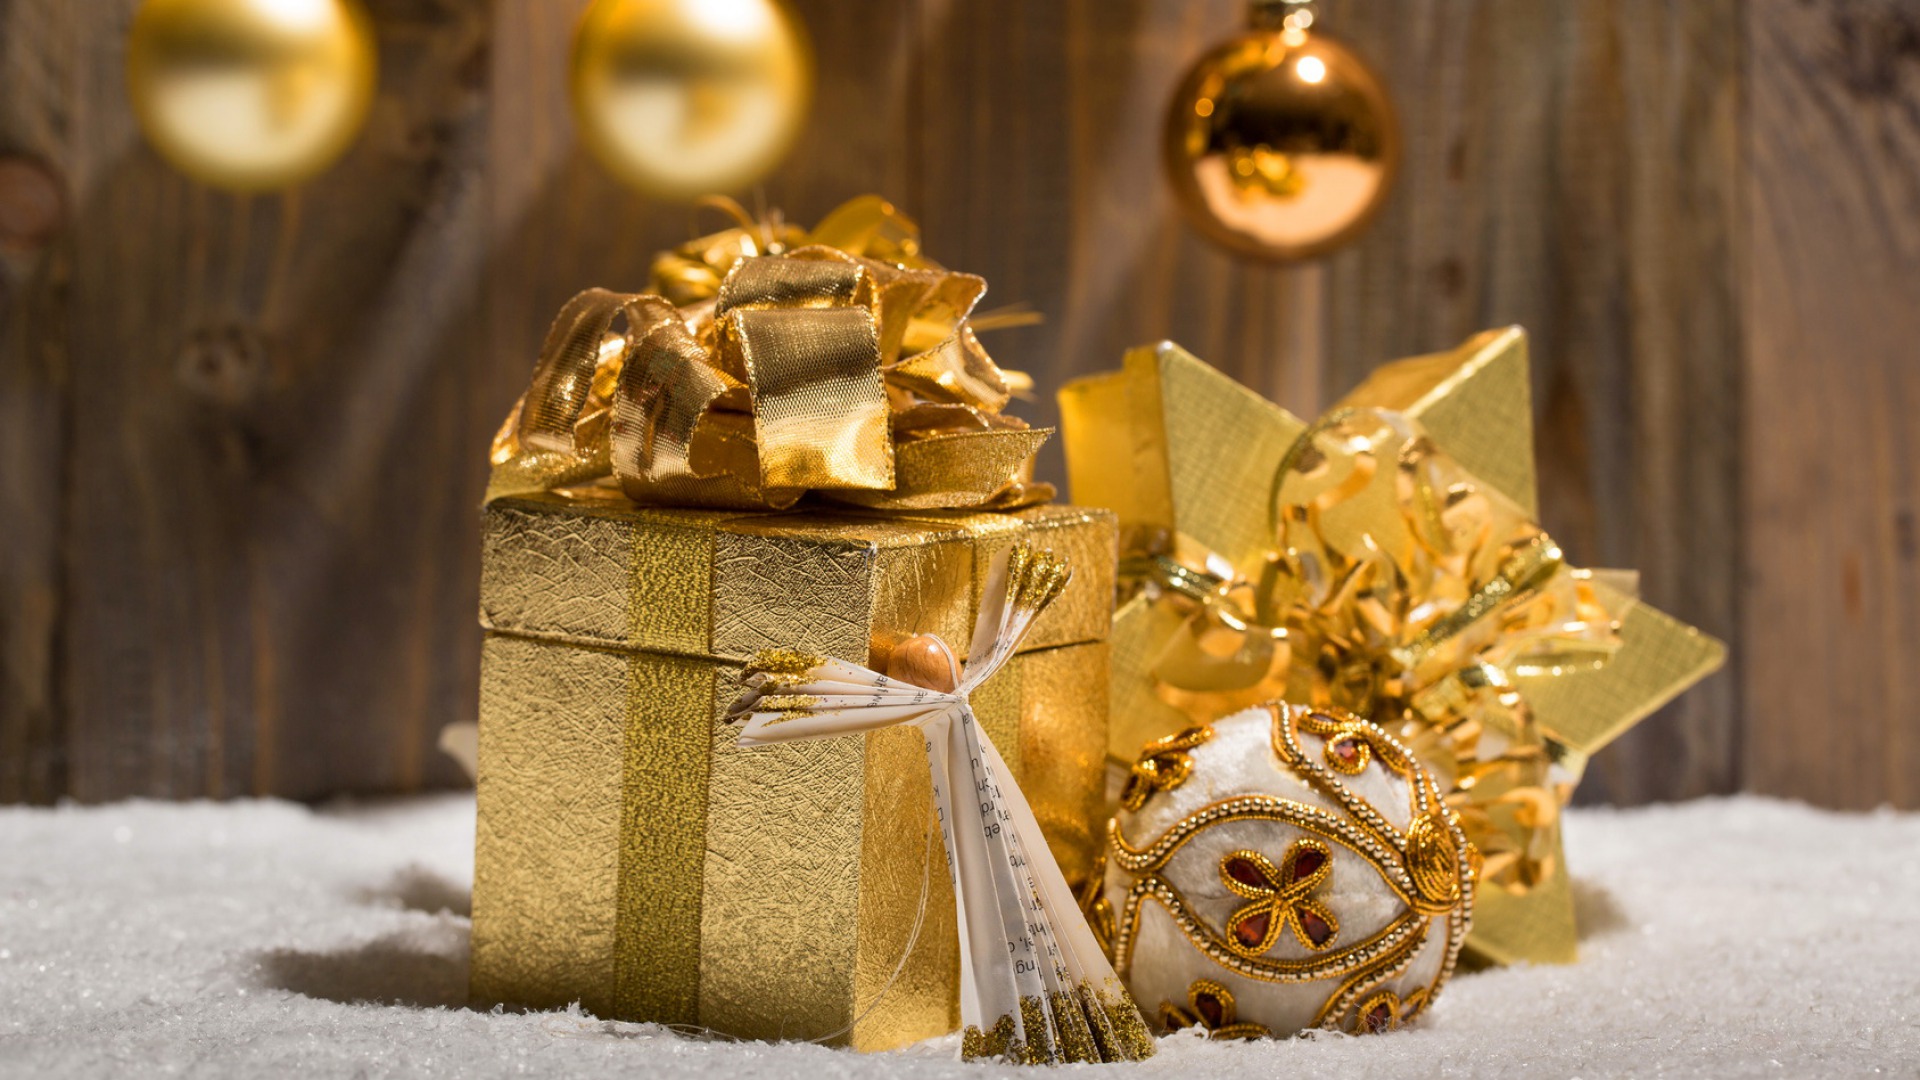 Wallpapers gold decor holiday on the desktop